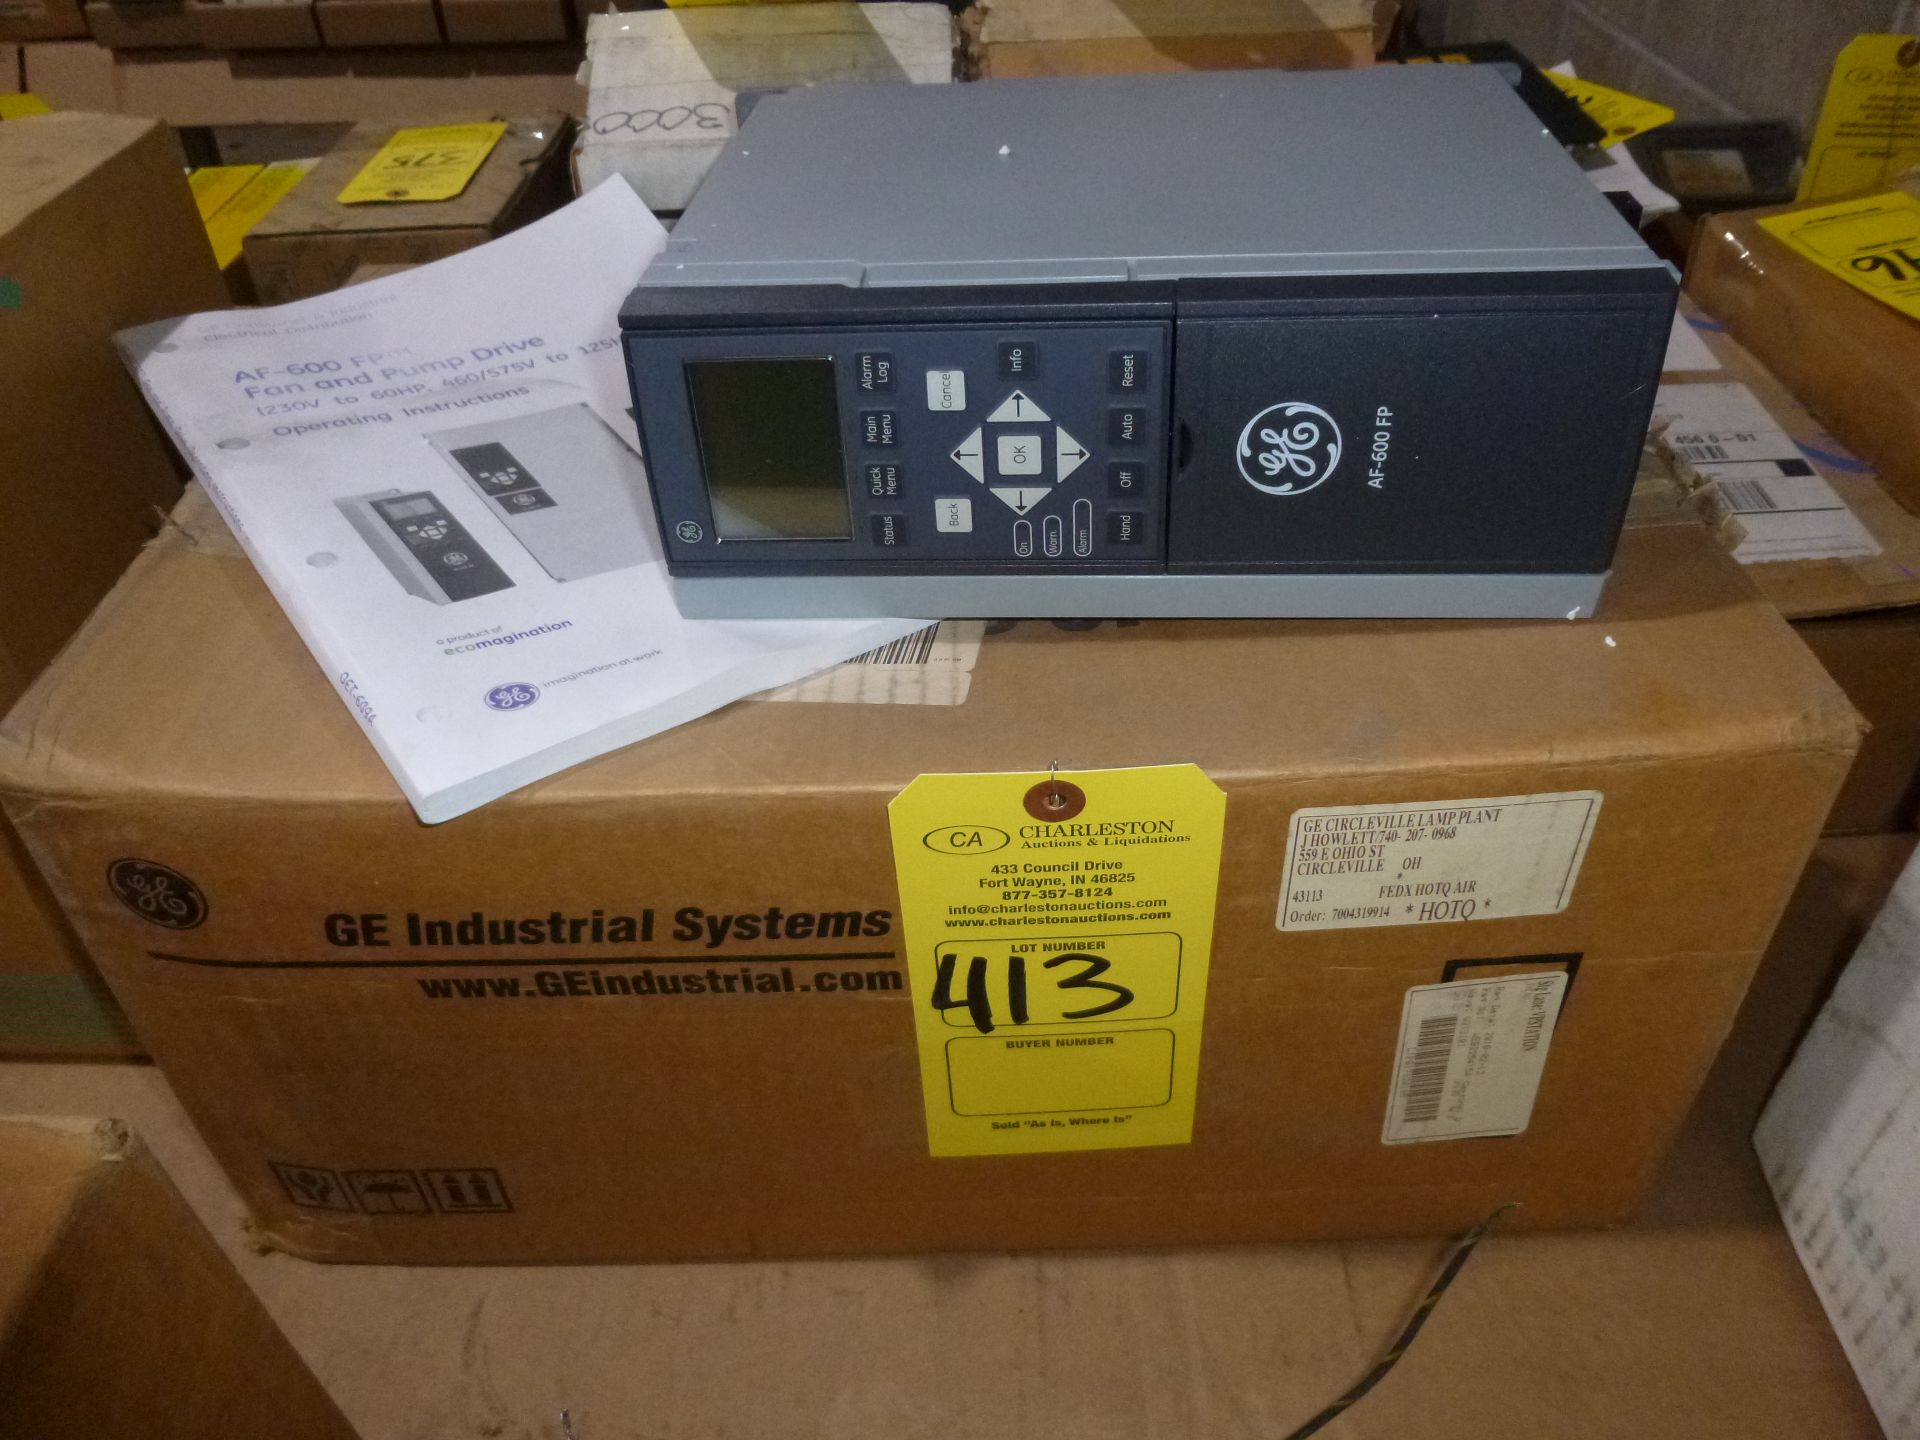 GE drive AF-600 FP, Model 6KFP43005X9XXXA1, new in box, as always with Brolyn LLC auctions, all lots